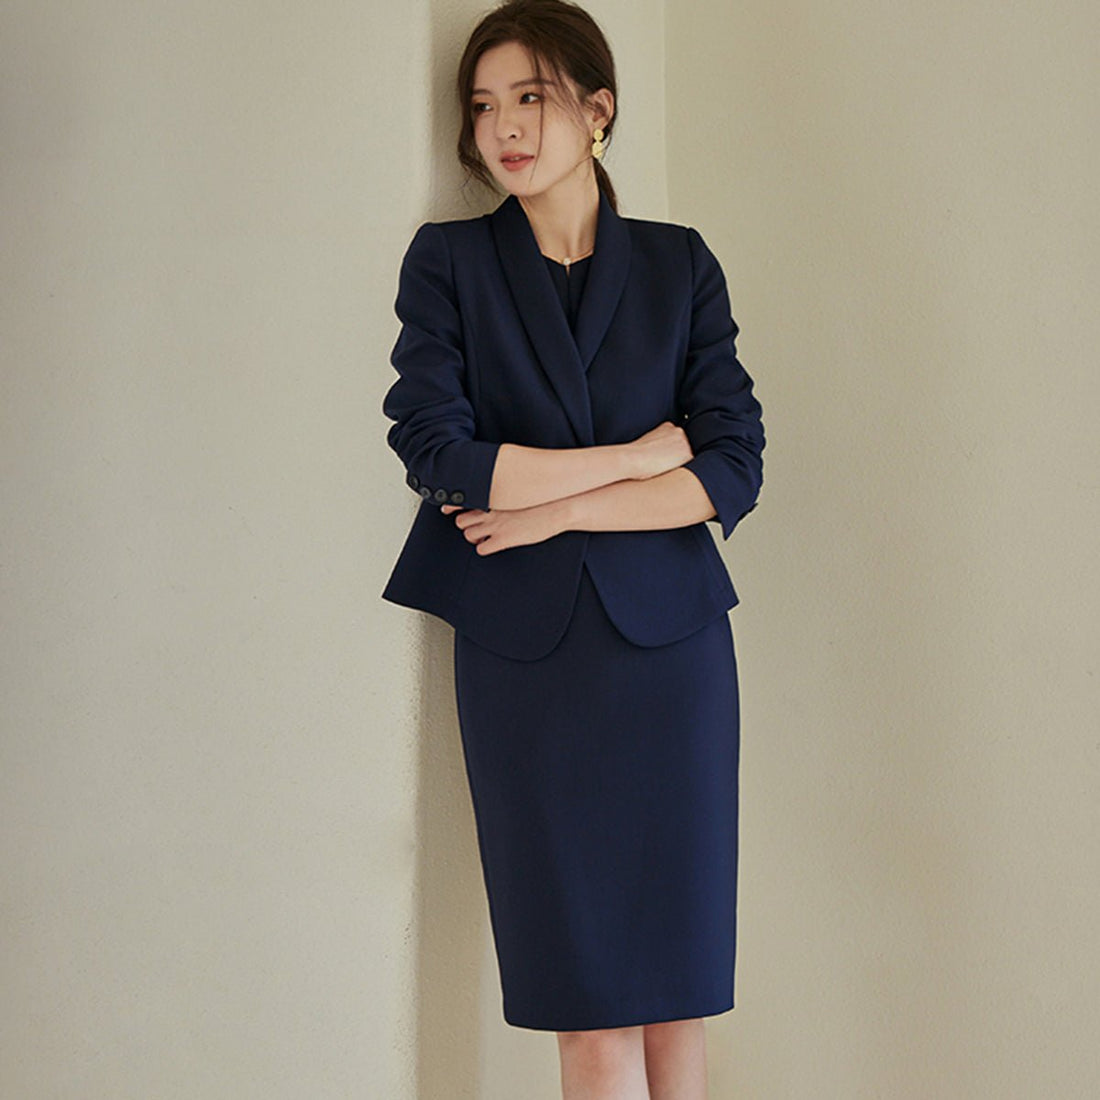 Navy Double-Breasted Blazer and Pencil Skirt Set - 0cm